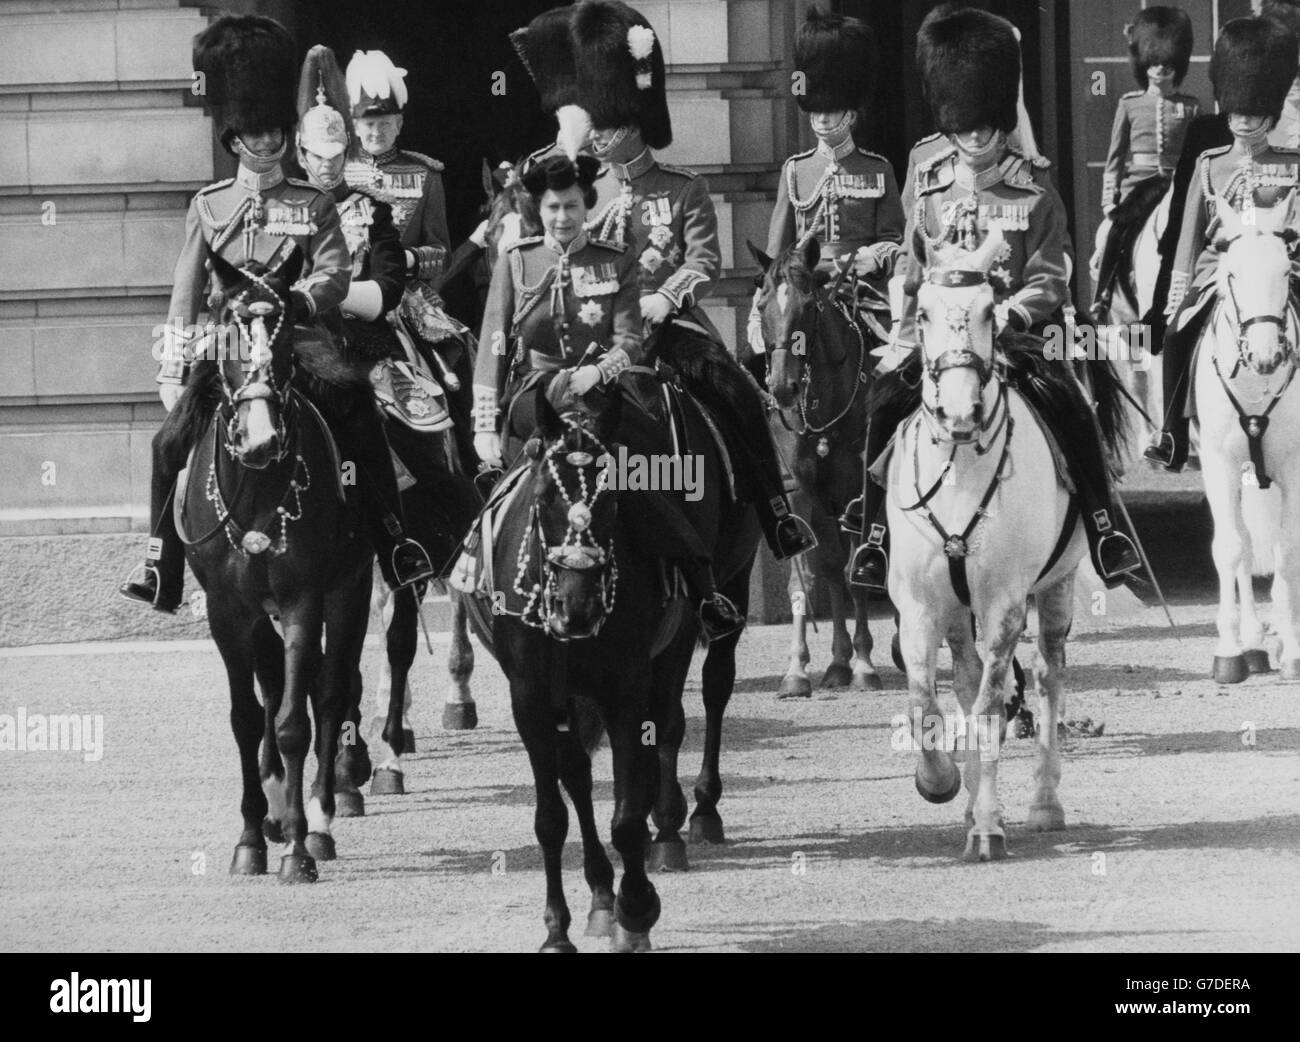 Queen Elizabeth II, wearing the uniform of the Grenadier Guards, leaves Buckingham Palace to take the salute at the Trooping of the Colour ceremony on Horse Guards Parade. Accompanying her are (l-r) the Duke of Edinburgh, Prince Charles, and the Duke of Kent. Stock Photo